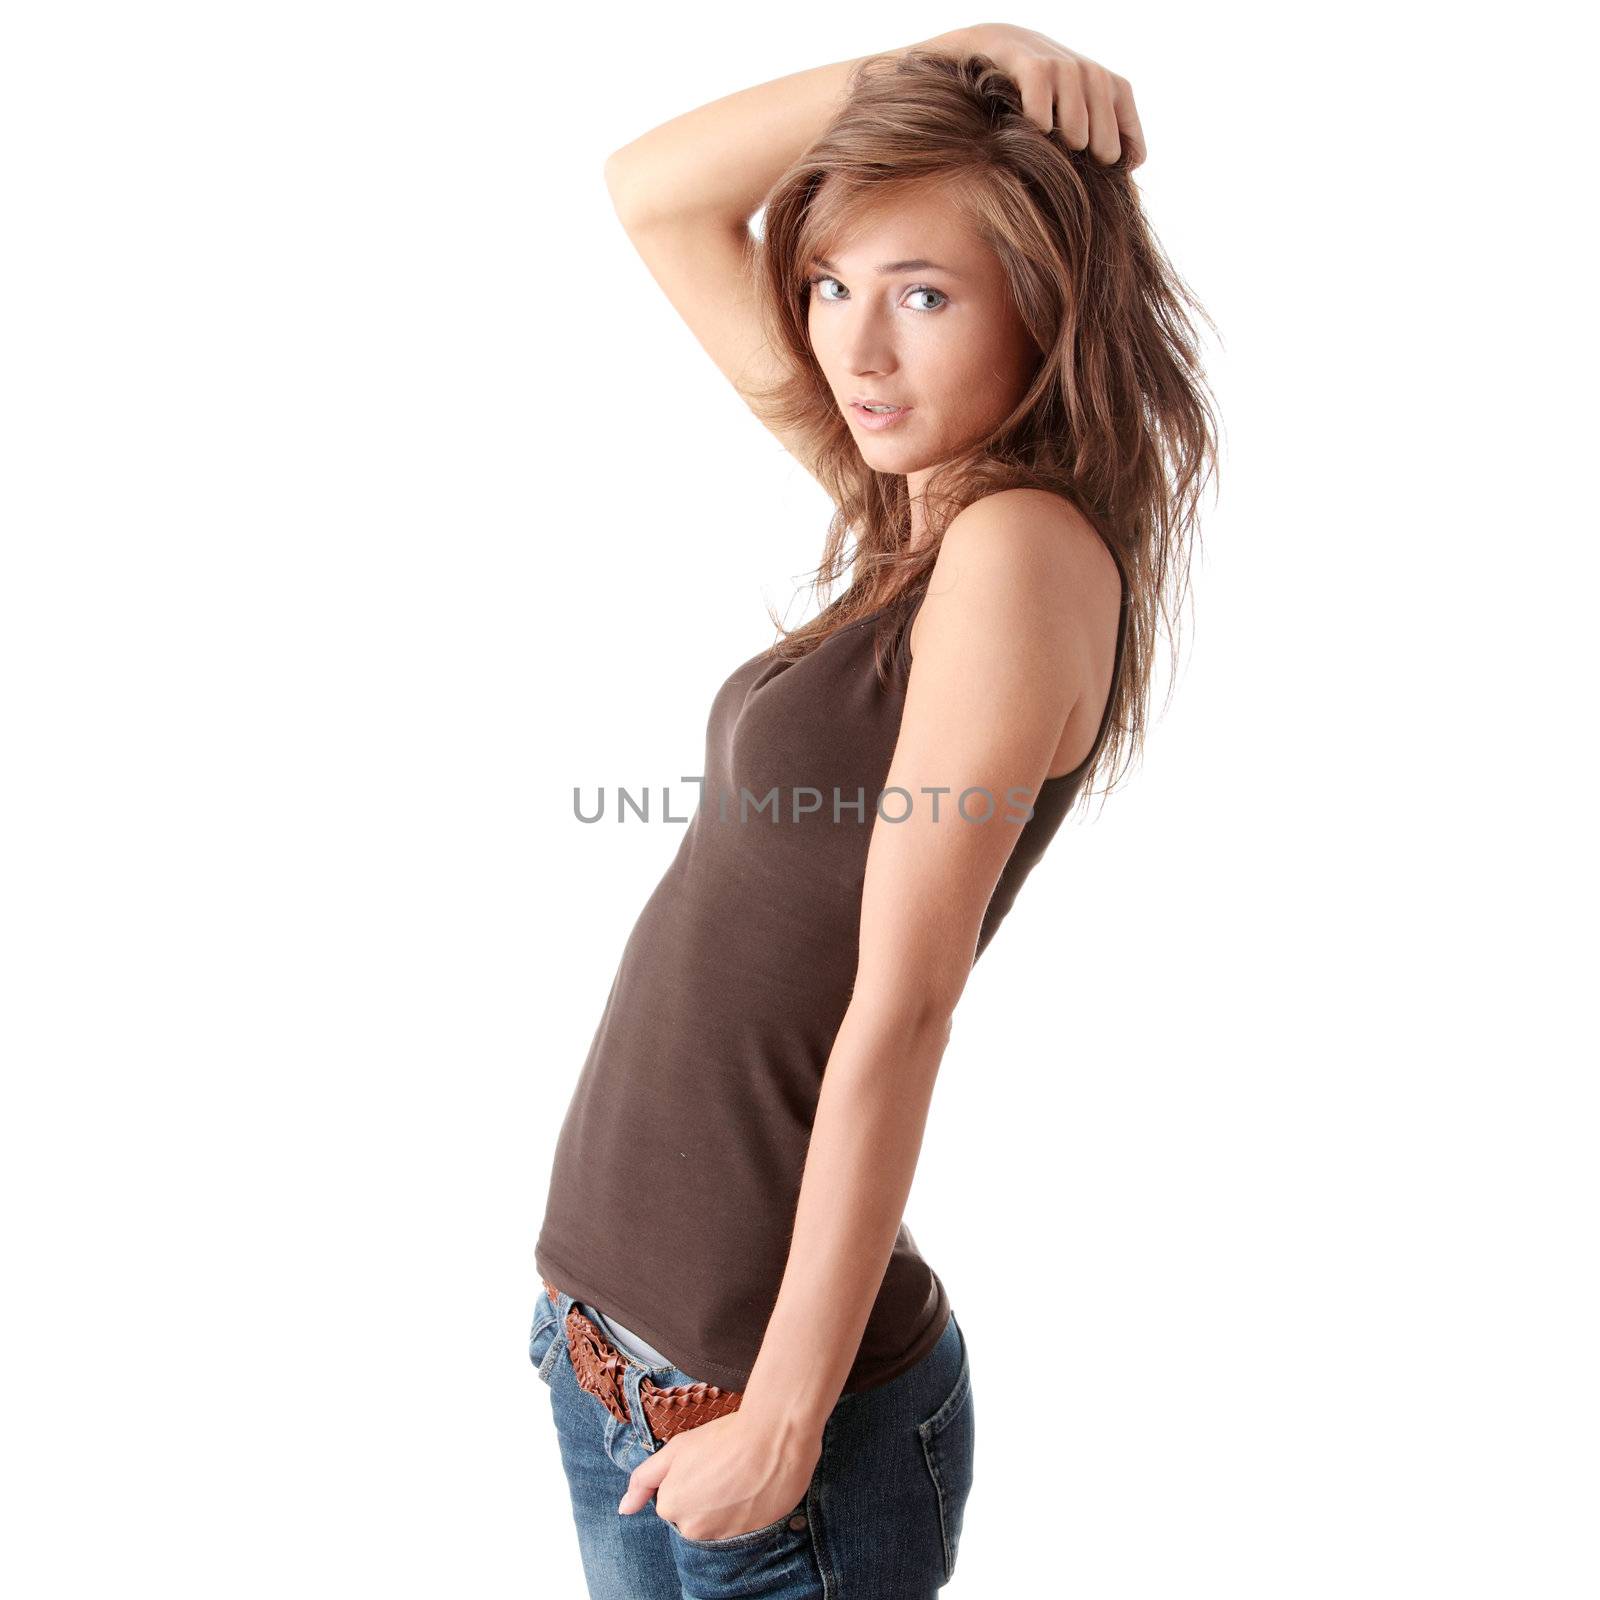 Young smiling student woman. Over white background